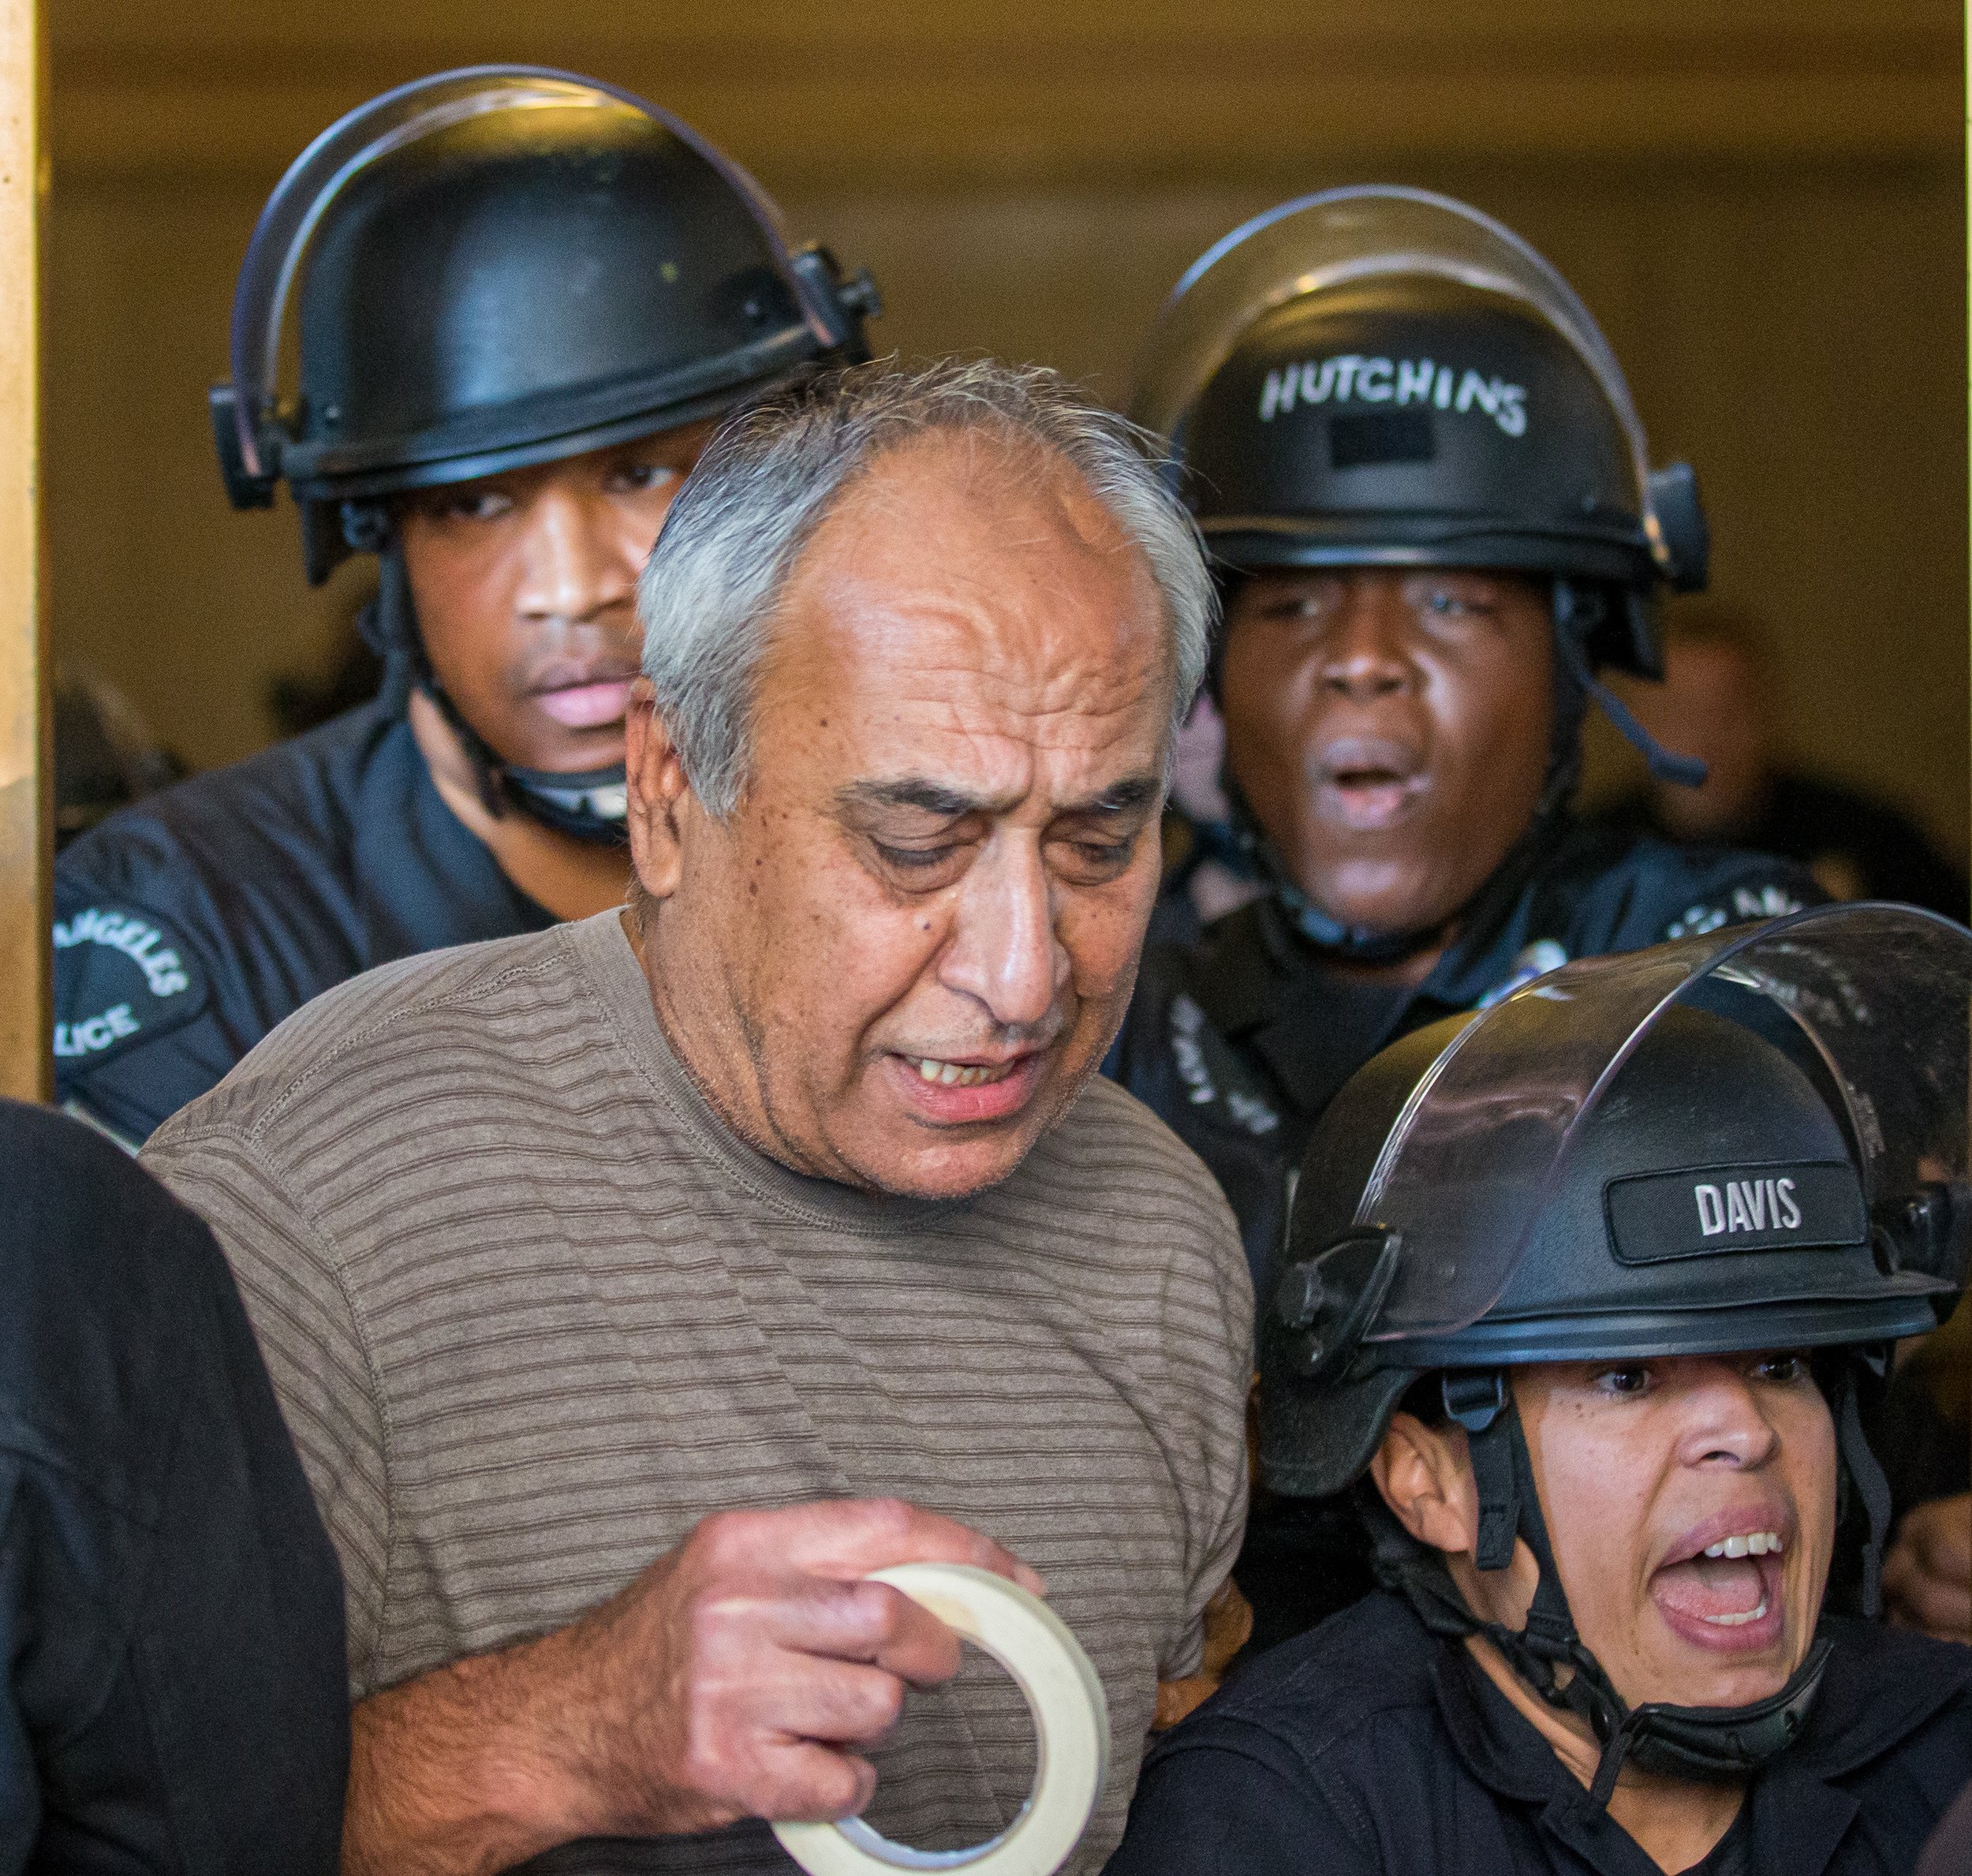  Hamid Kan being pushed out the Los Angeles City Hall by LAPD wearing riot gear as protesters made their way inside taping up flyers calling for the resignation of Kevin De Len on Tuesday, Oct. 18 after racist remarks were made in a leaked audio at L